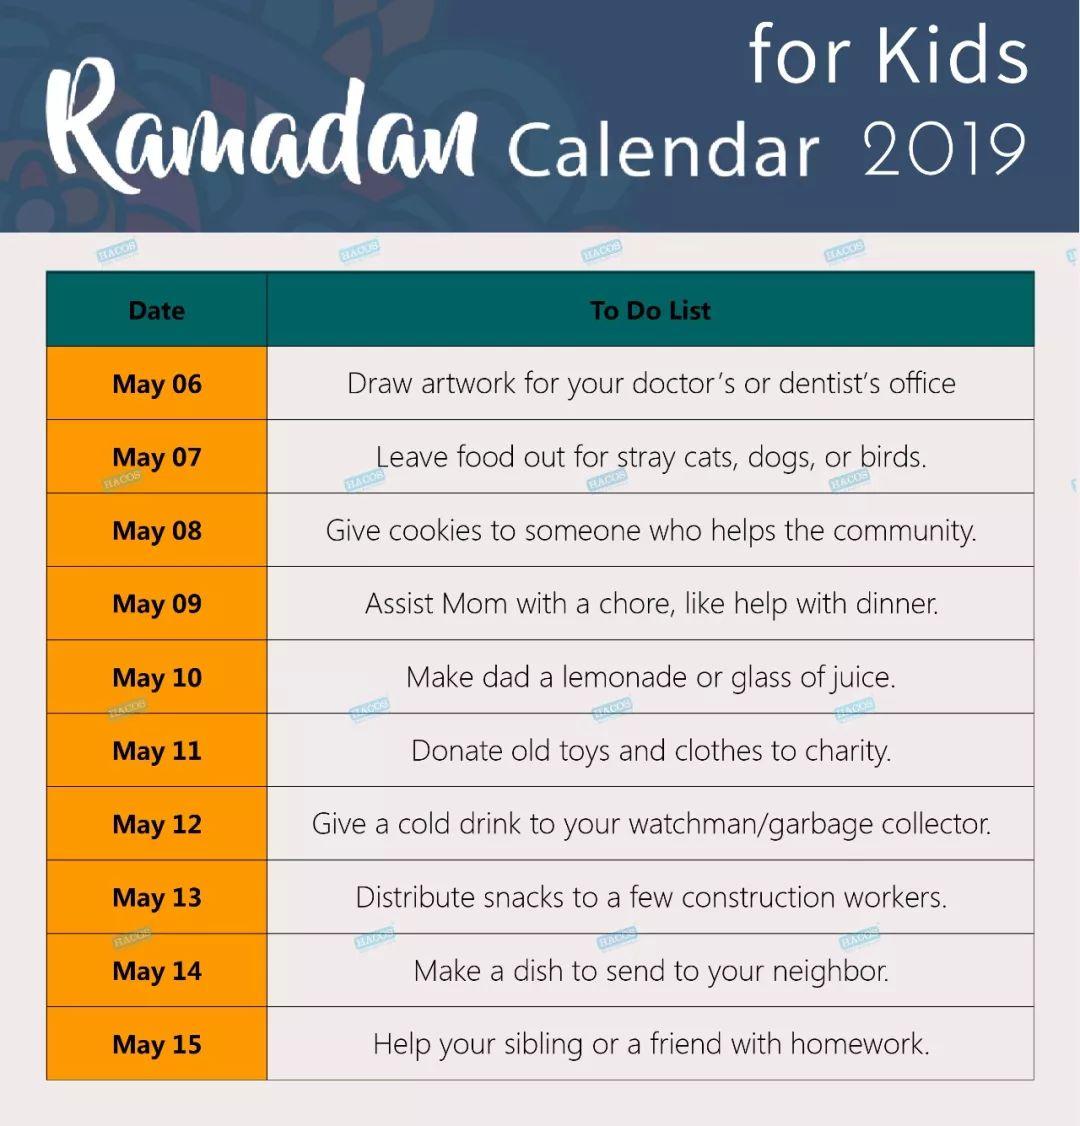 china's 2019 ramadan schedule just came out!